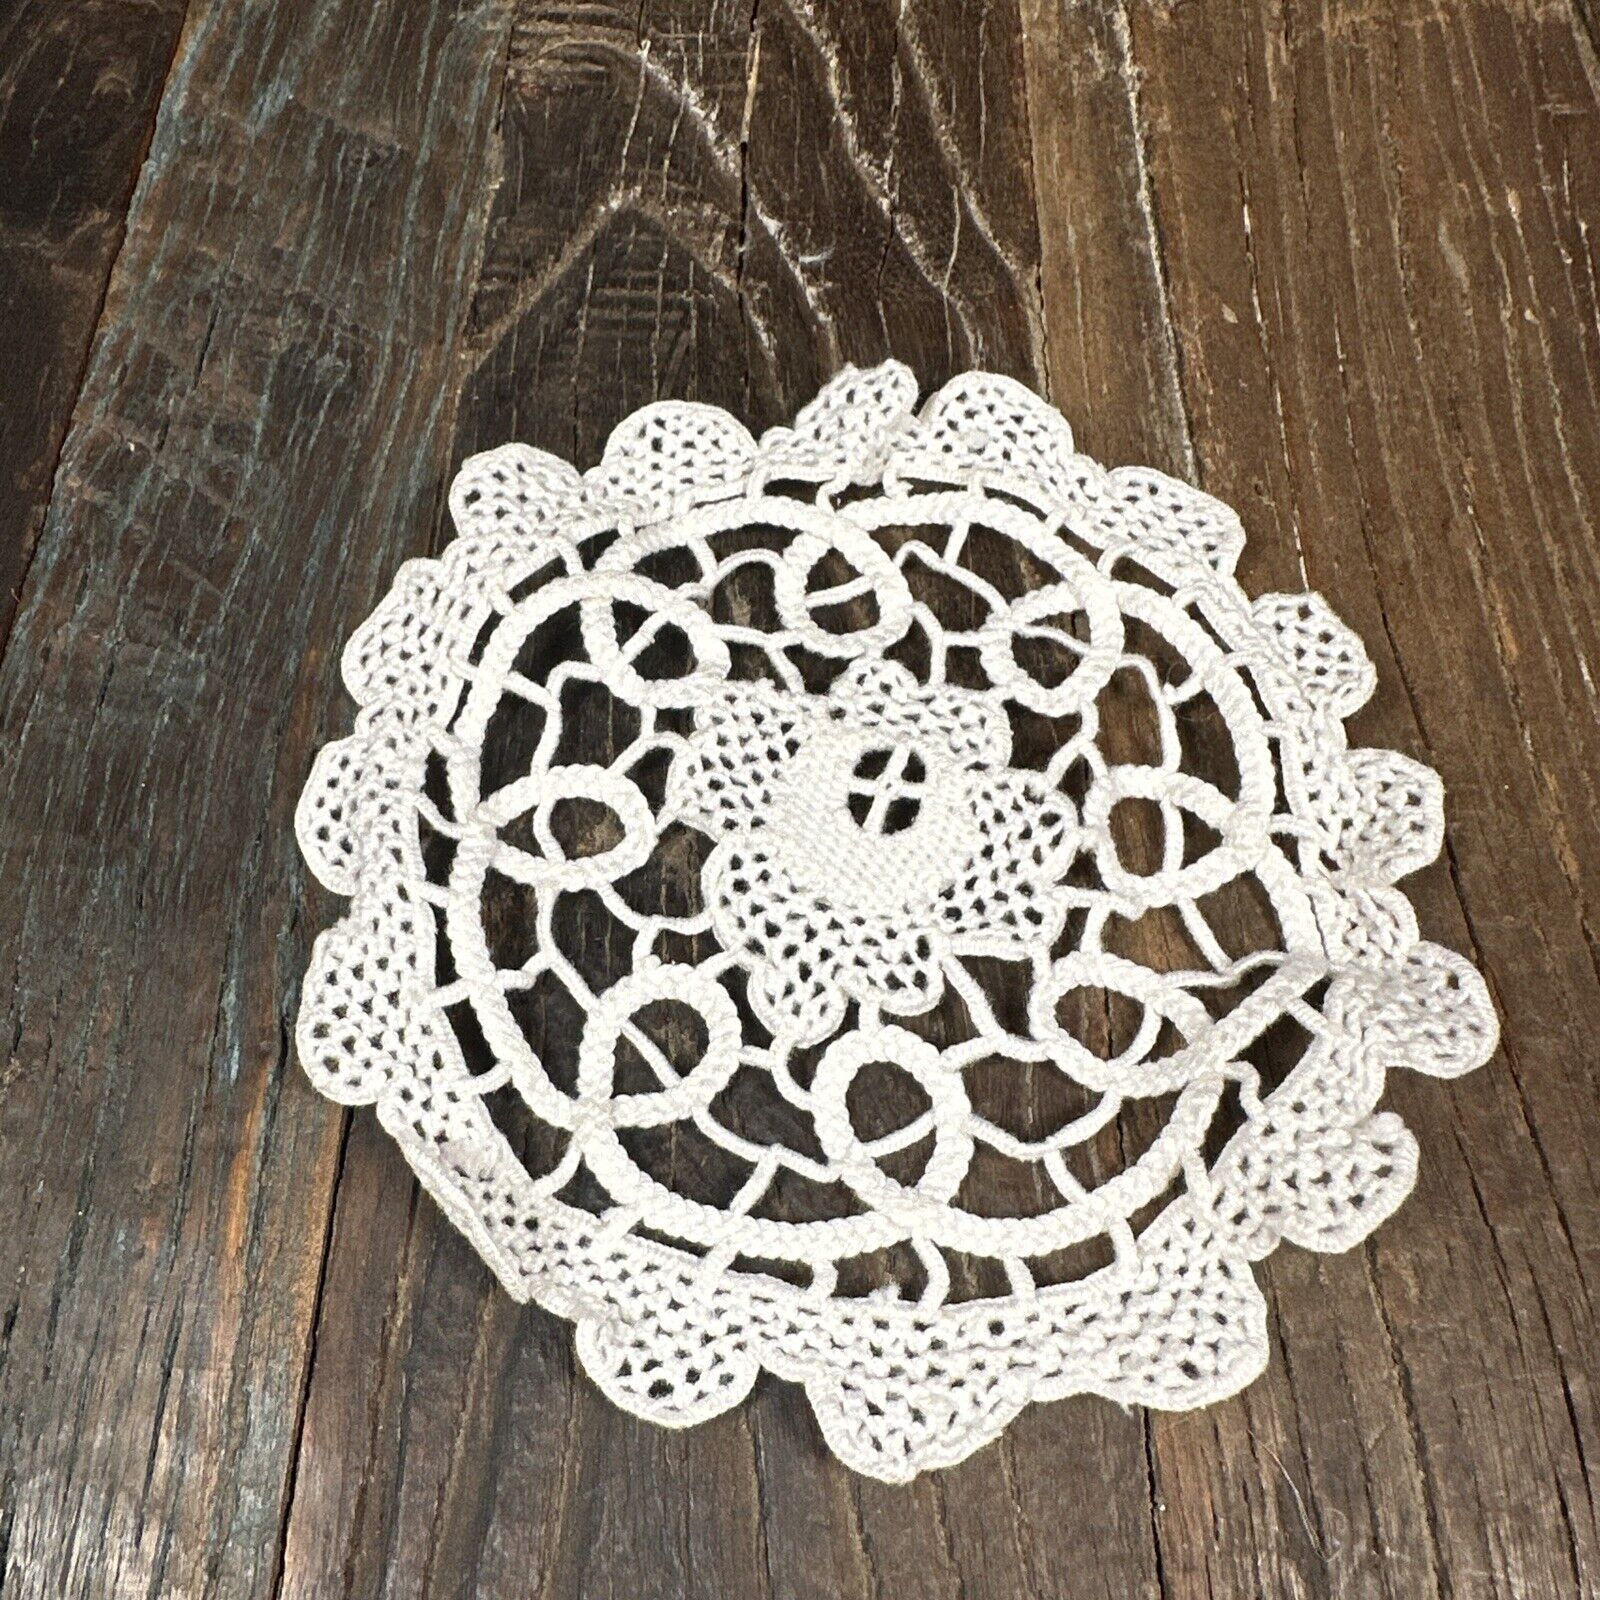 Beautiful Collectible Handmade Needle Laced Doily Crisp White 5 Inch NICE